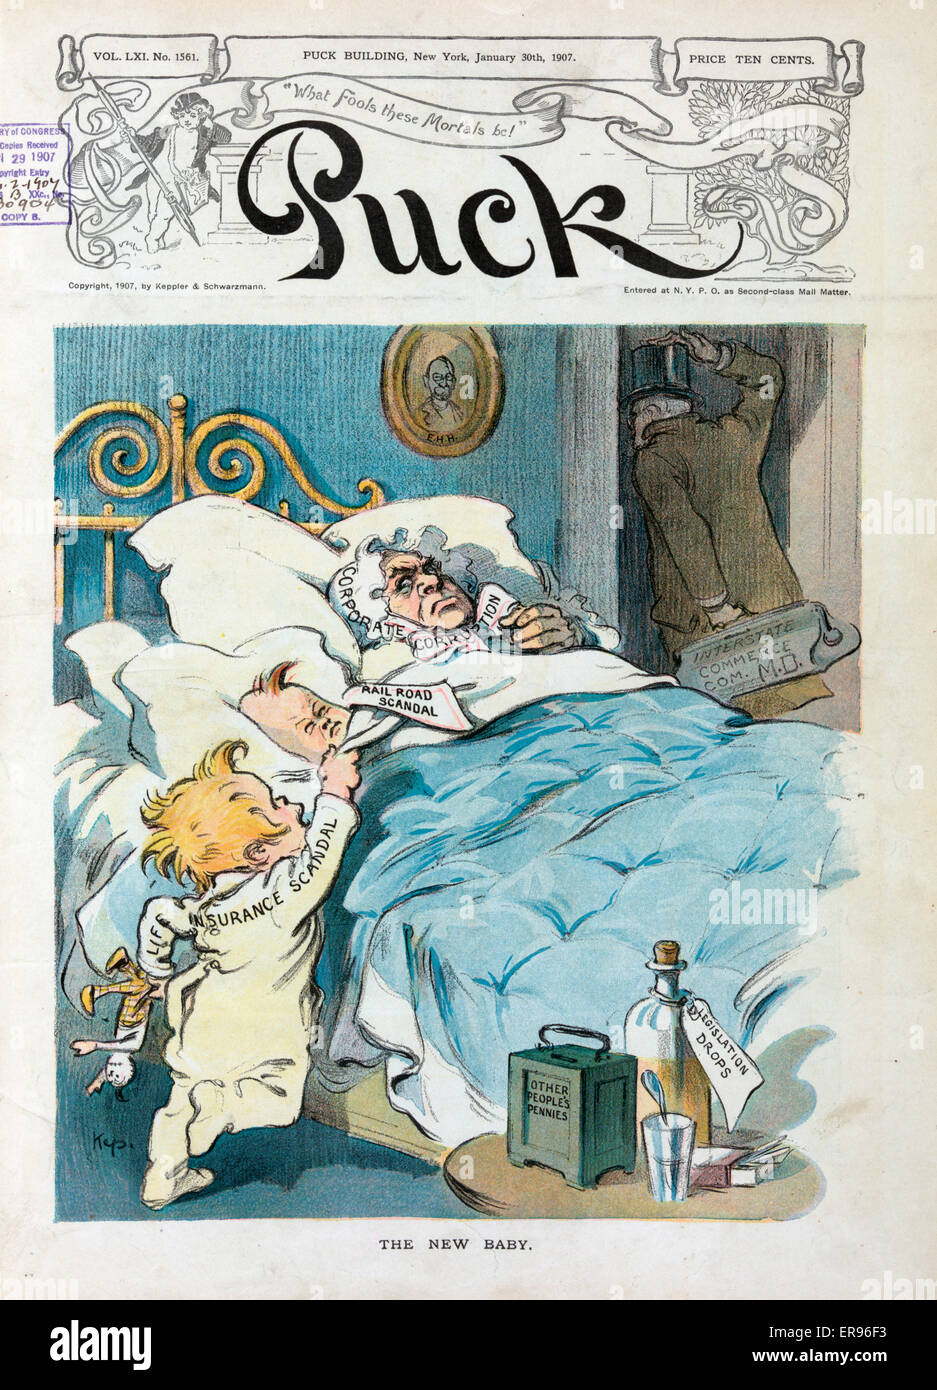 The new baby. Illustration shows a man labeled Corporate Corruption and a young boy labeled Rail Road Scandal lying in bed, and another young child labeled Life Insurance Scandal trying to climb into the bed; a man departing the room carries a doctor's ba Stock Photo